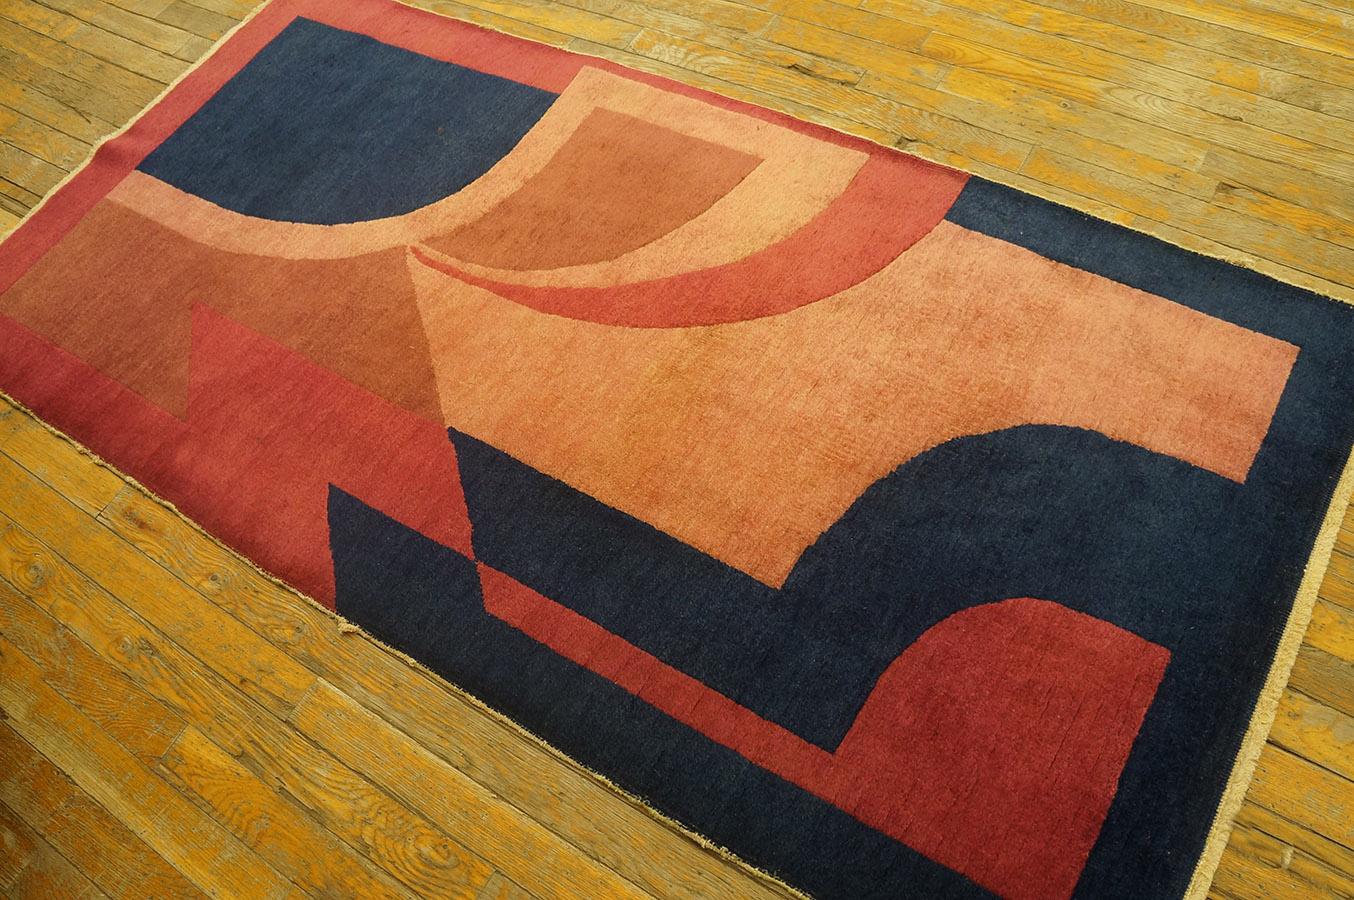 1920s Chinese Art Deco Carpet with Modernist Design (2'10'' x 5'9'' - 86 x 175) In Good Condition For Sale In New York, NY